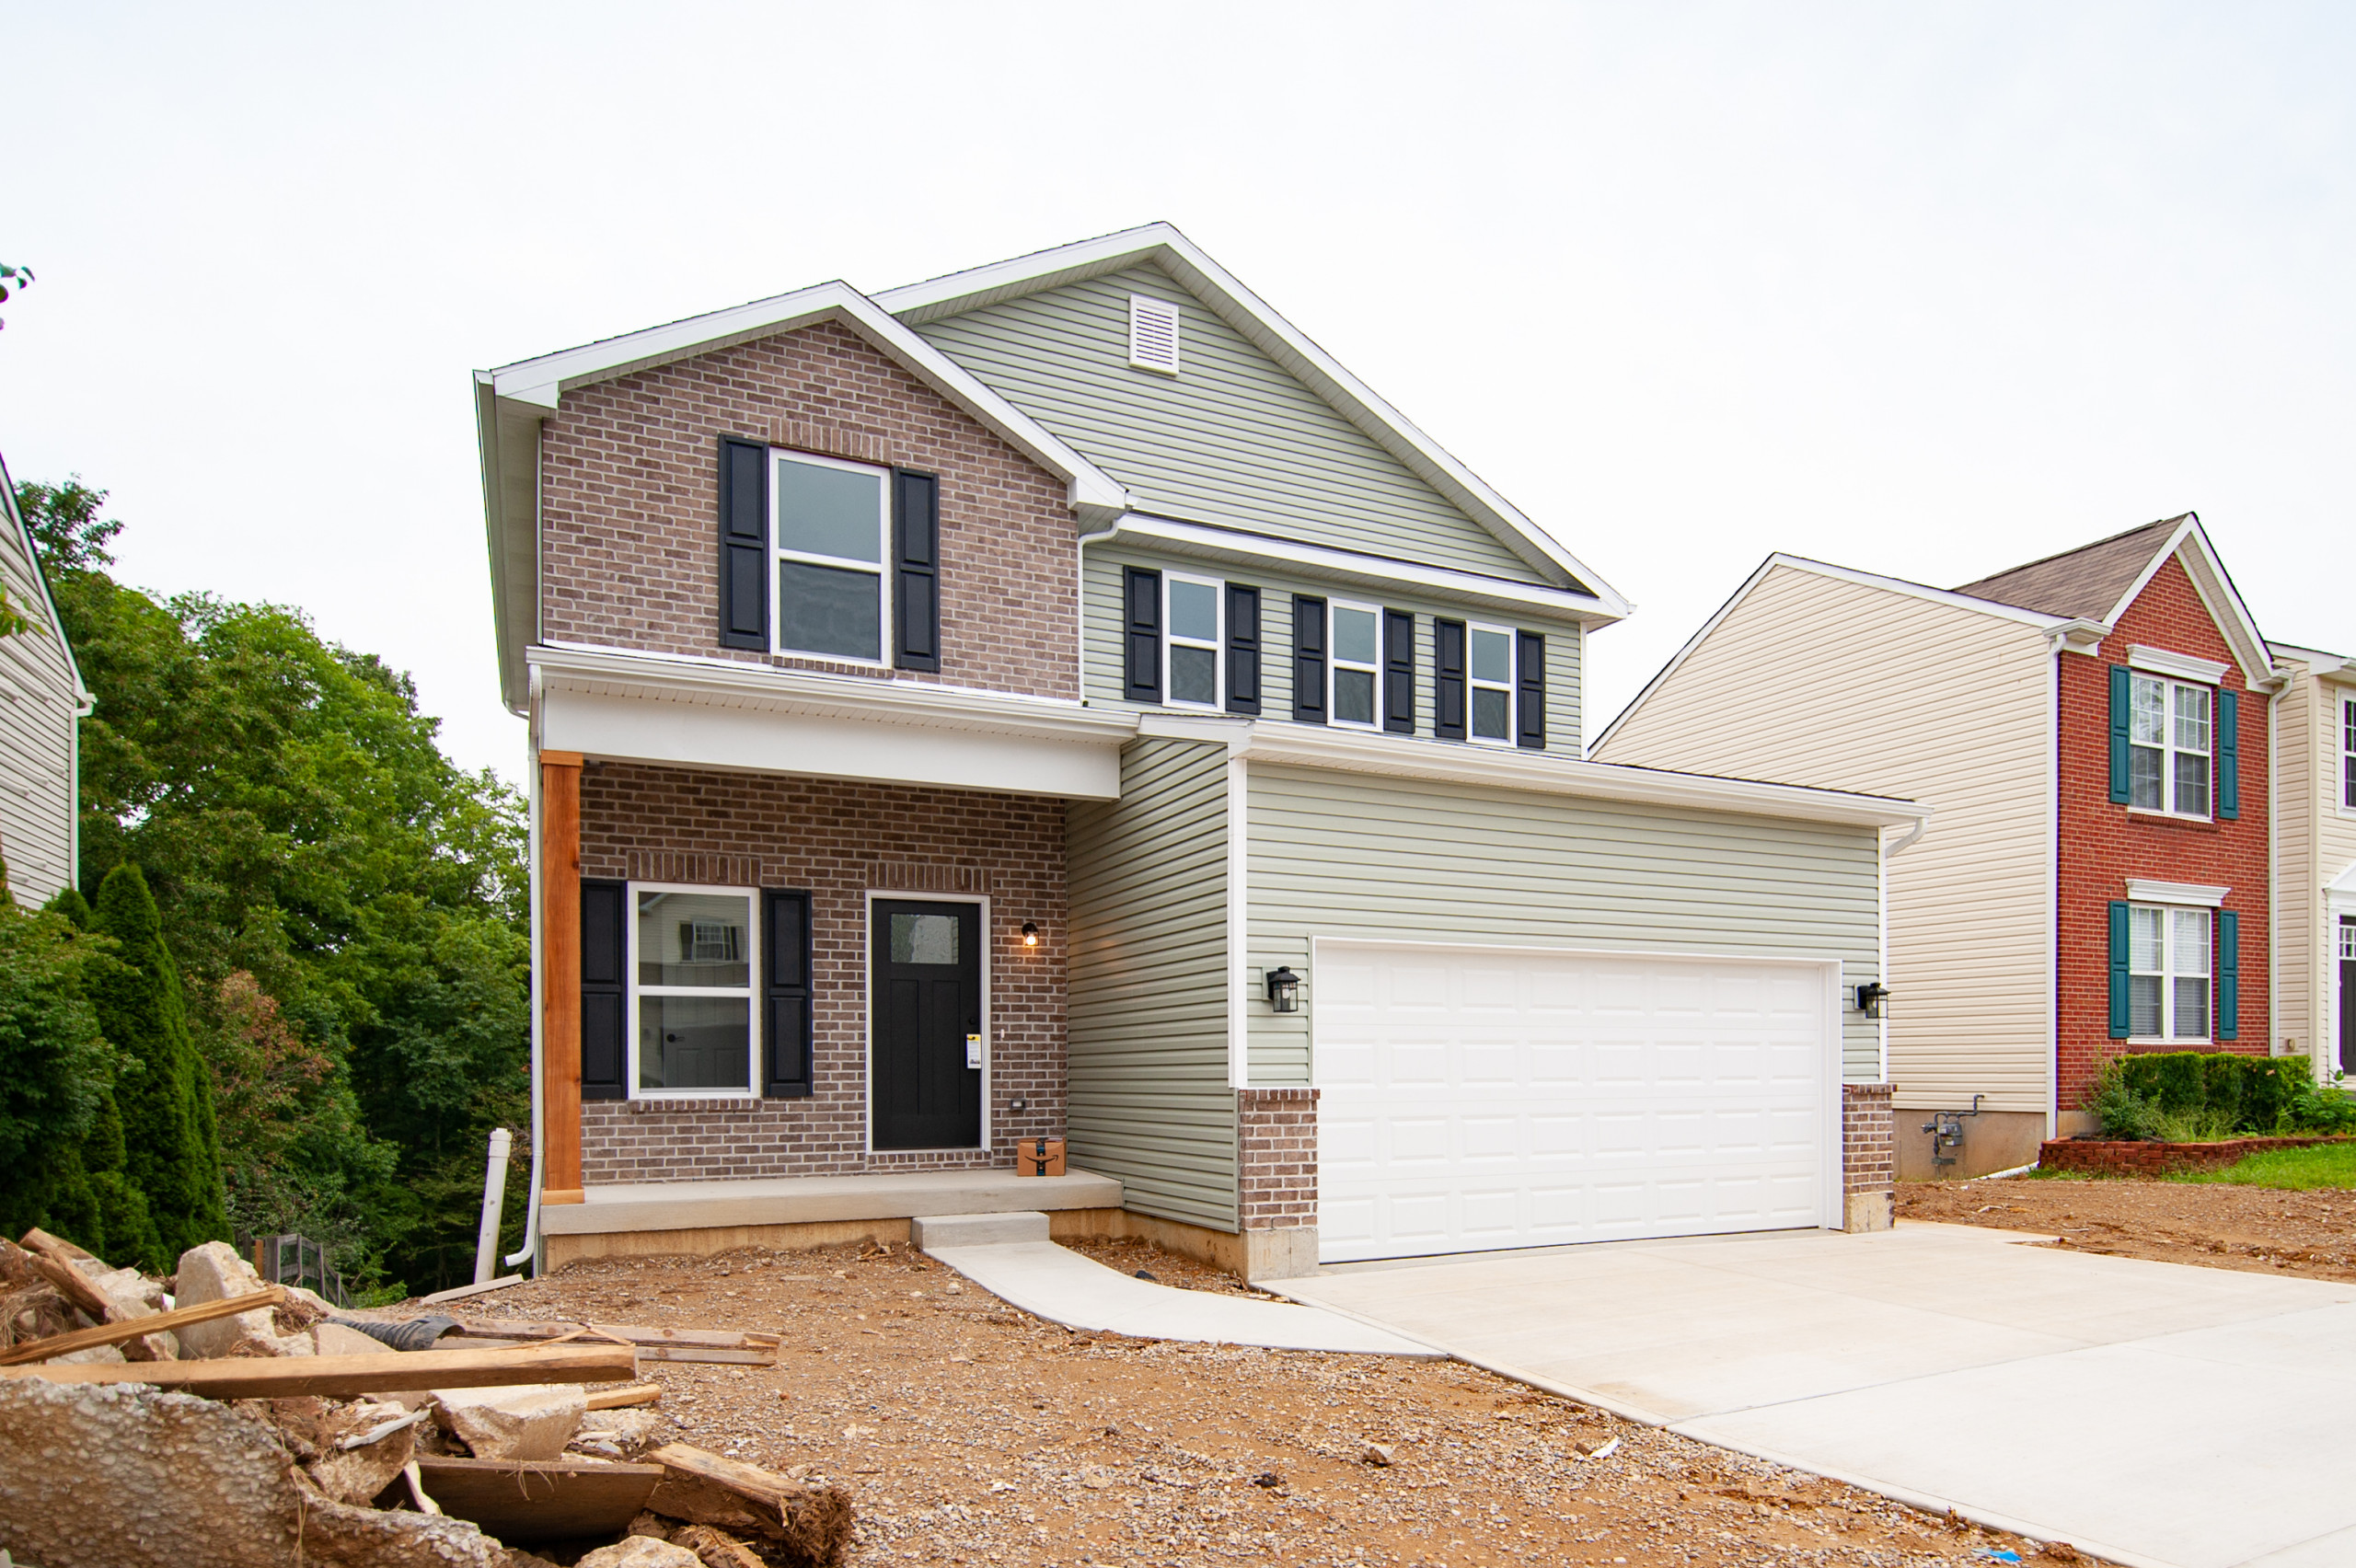 New 2 story home in Morrow